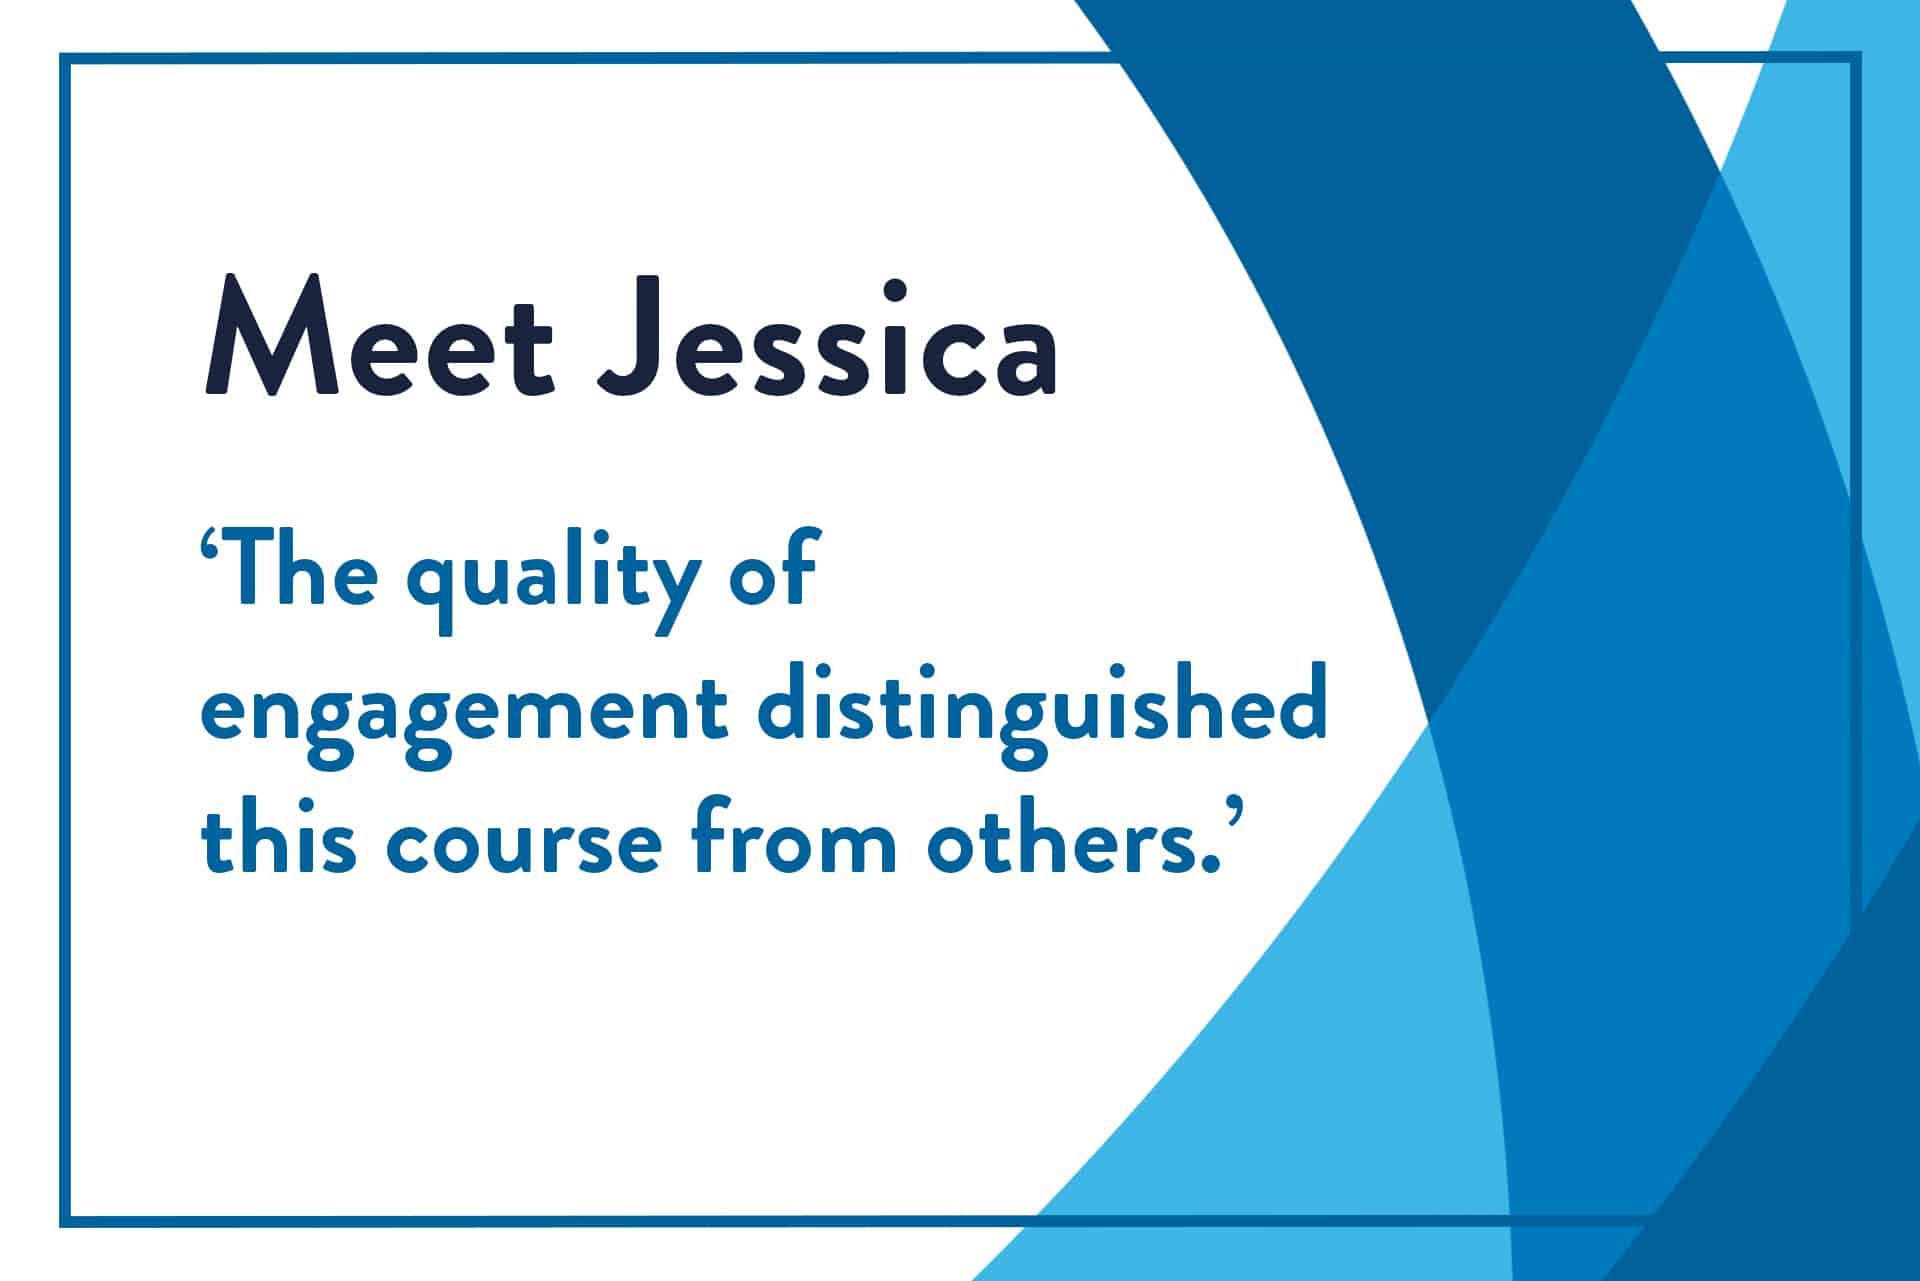 Blog header with the title 'Meet Jessica' and a quote from the testimonial: 'The quality of engagement distinguished this course from others.'